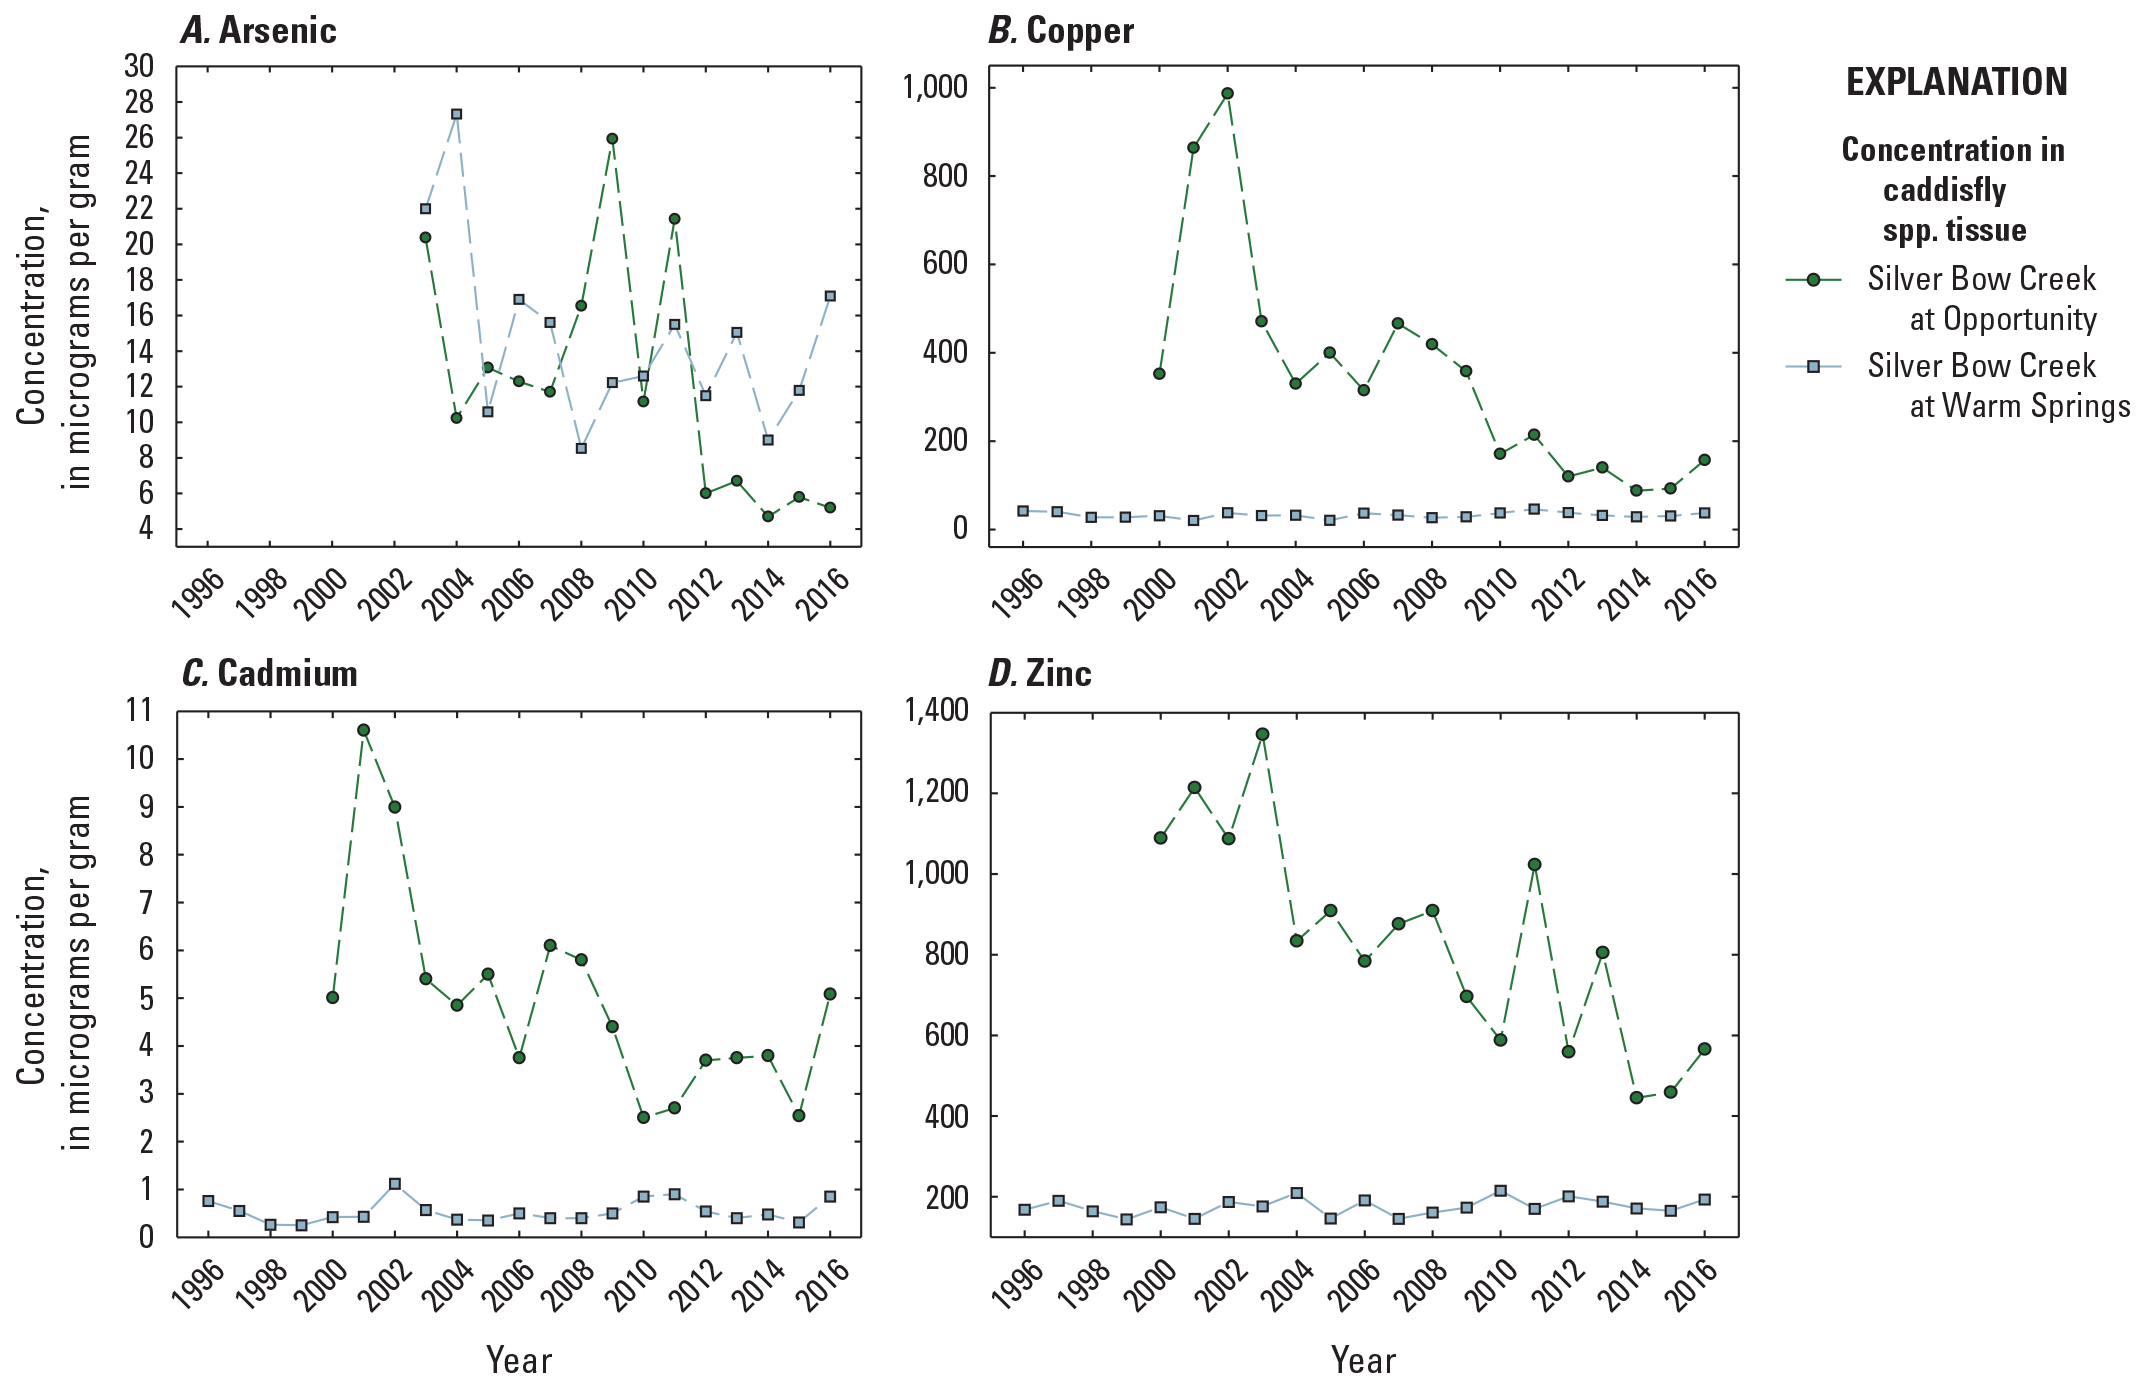 Concentrations at Opportunity were generally more variable that concentrations at
                        Silver Bow.